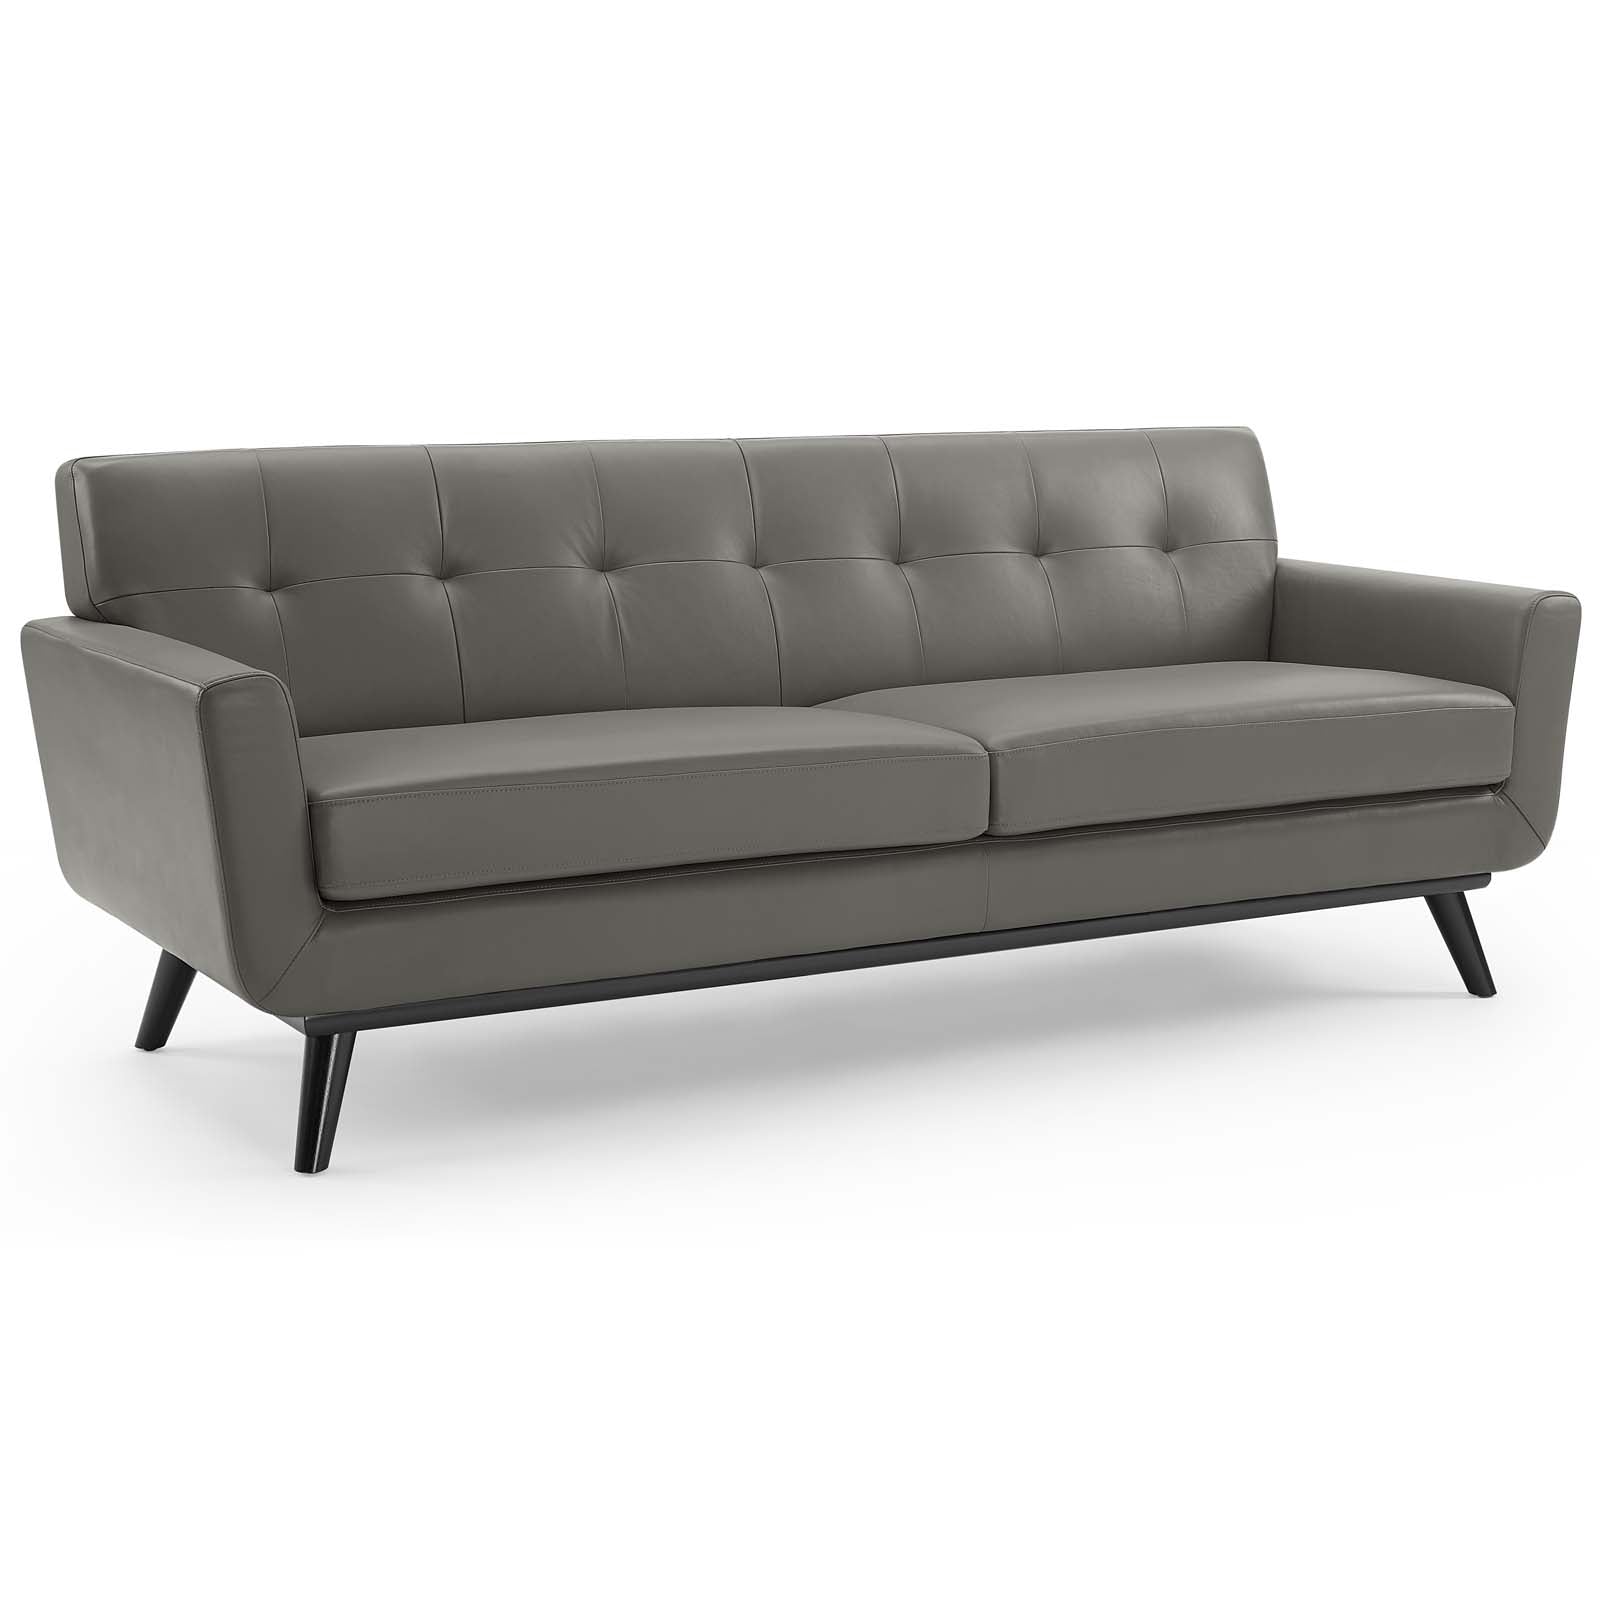 Modway Sofas & Couches - Engage Top-Grain Leather Living Room Lounge Sofa Gray